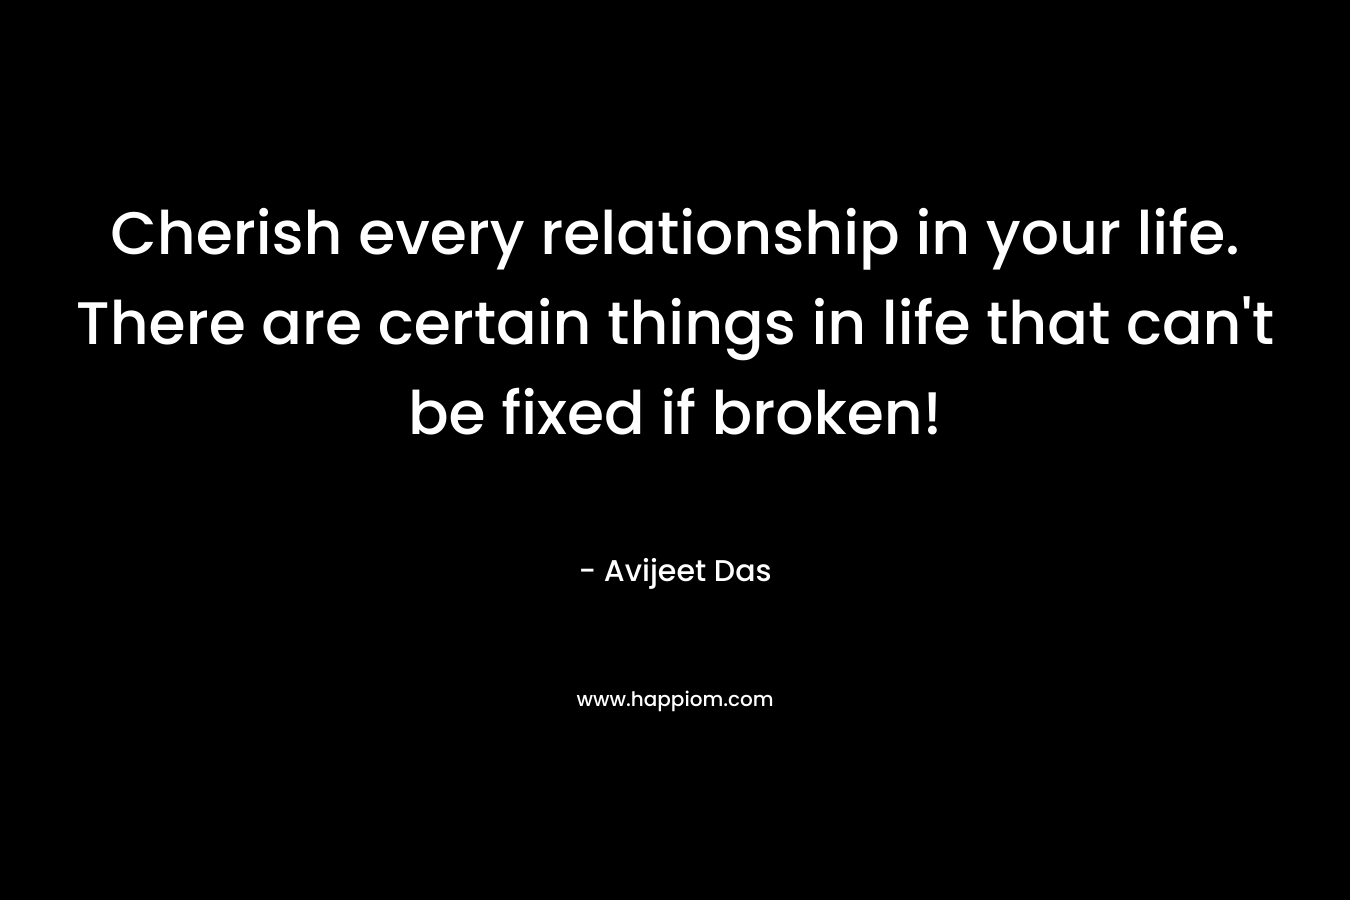 Cherish every relationship in your life. There are certain things in life that can't be fixed if broken!